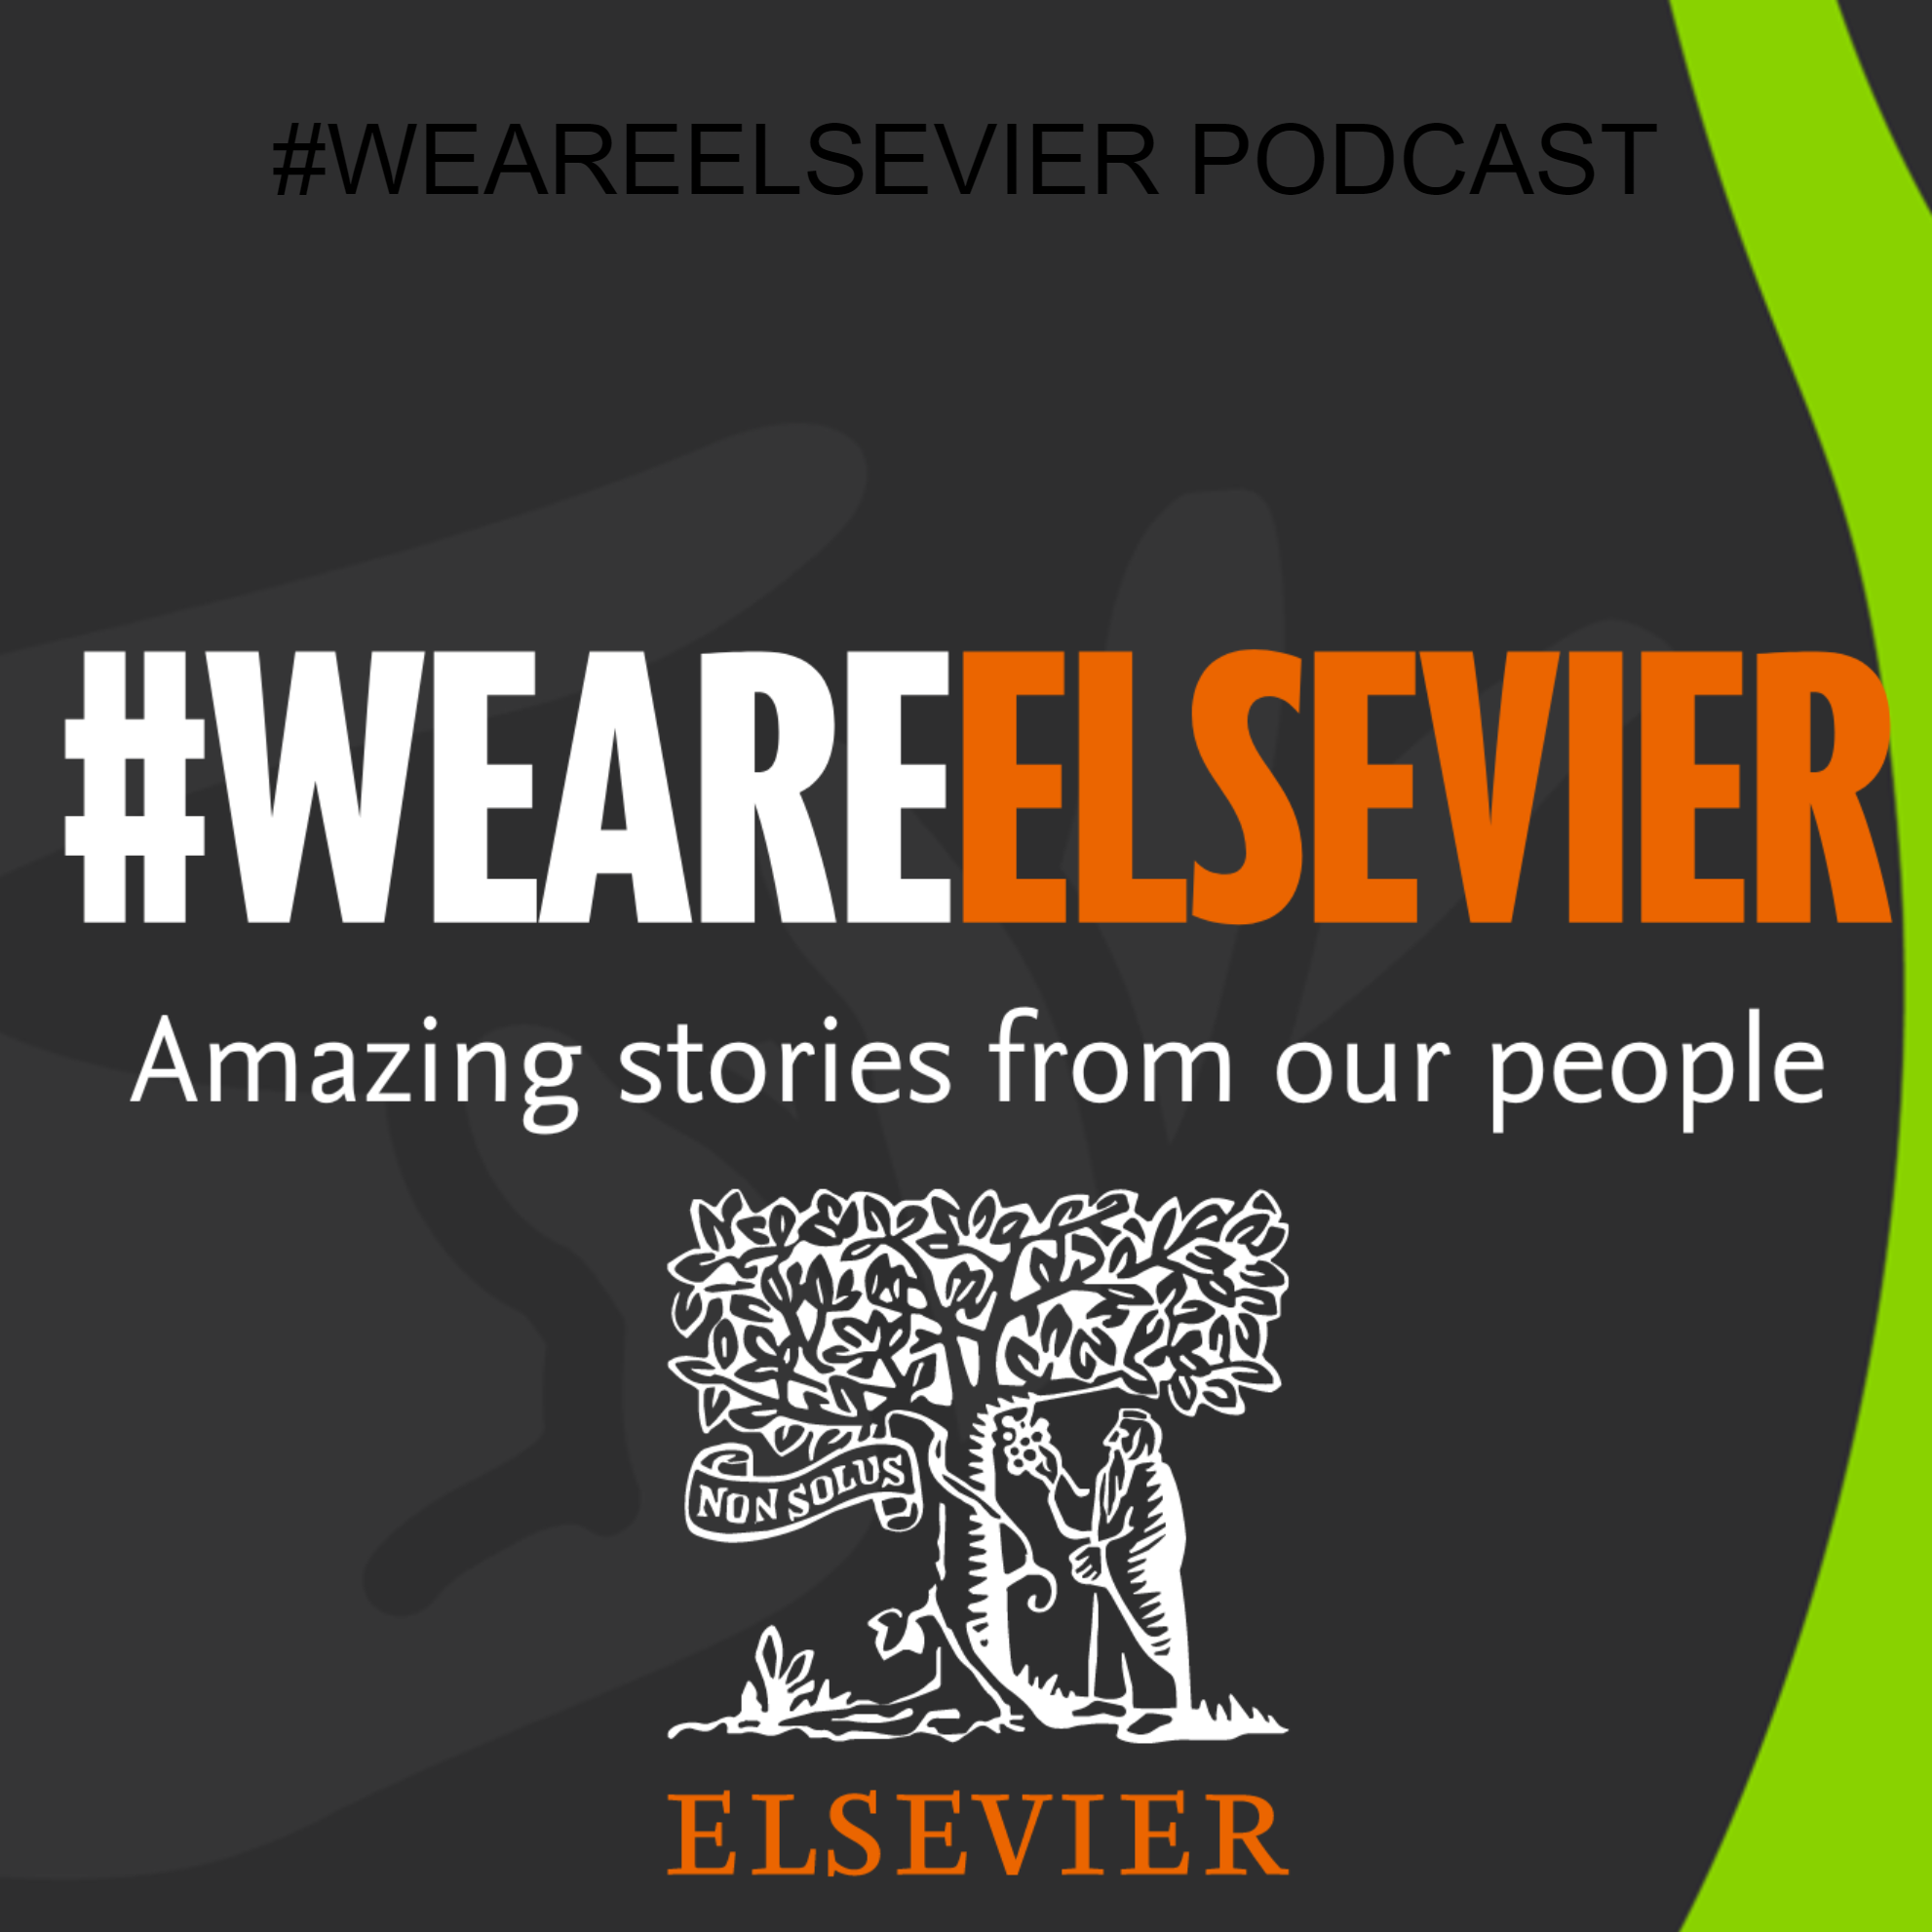 #WEAREELSEVIER Podcasts